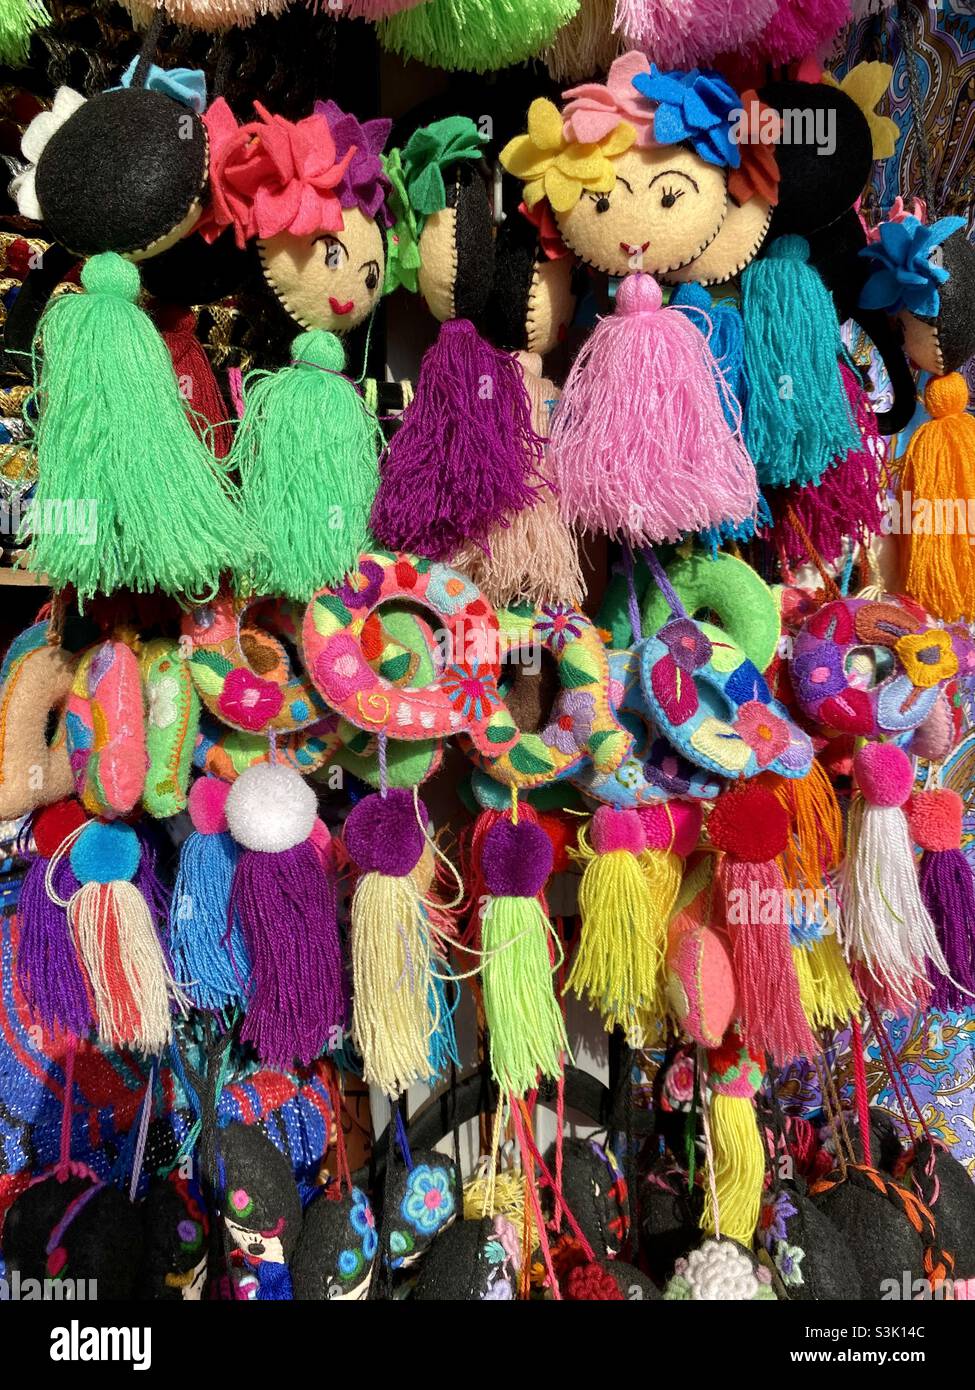 Mexican marketplace in Cabo. Lots of pompoms and yarn accessories. So colorful! Stock Photo